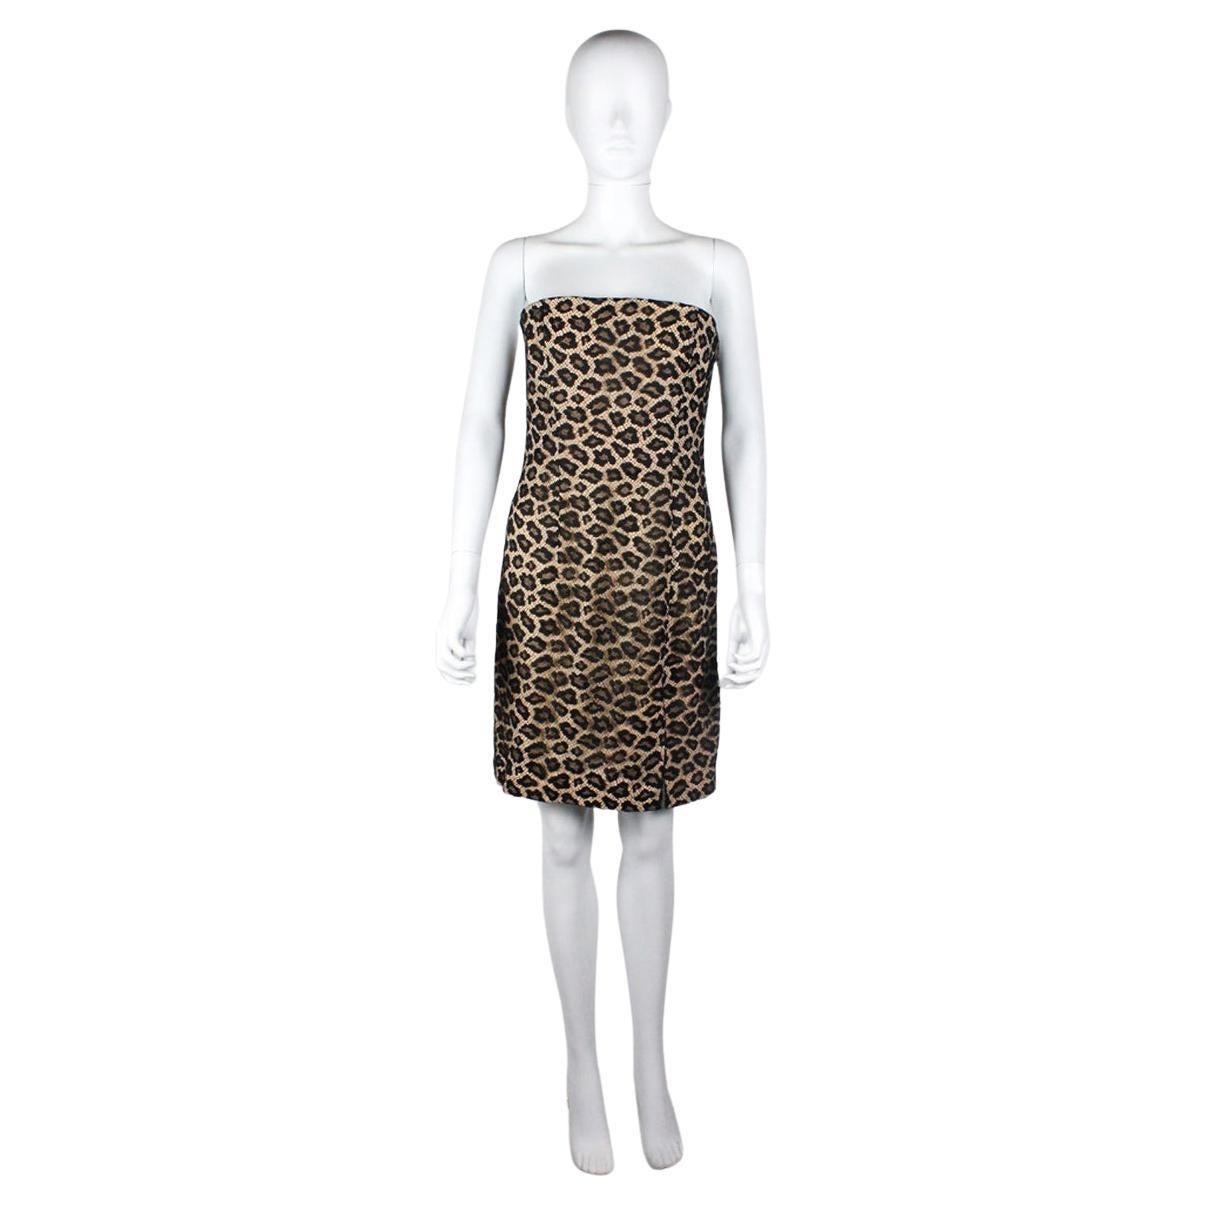 Givenchy Couture by Alexander McQueen Leopard Dress F/W 1997